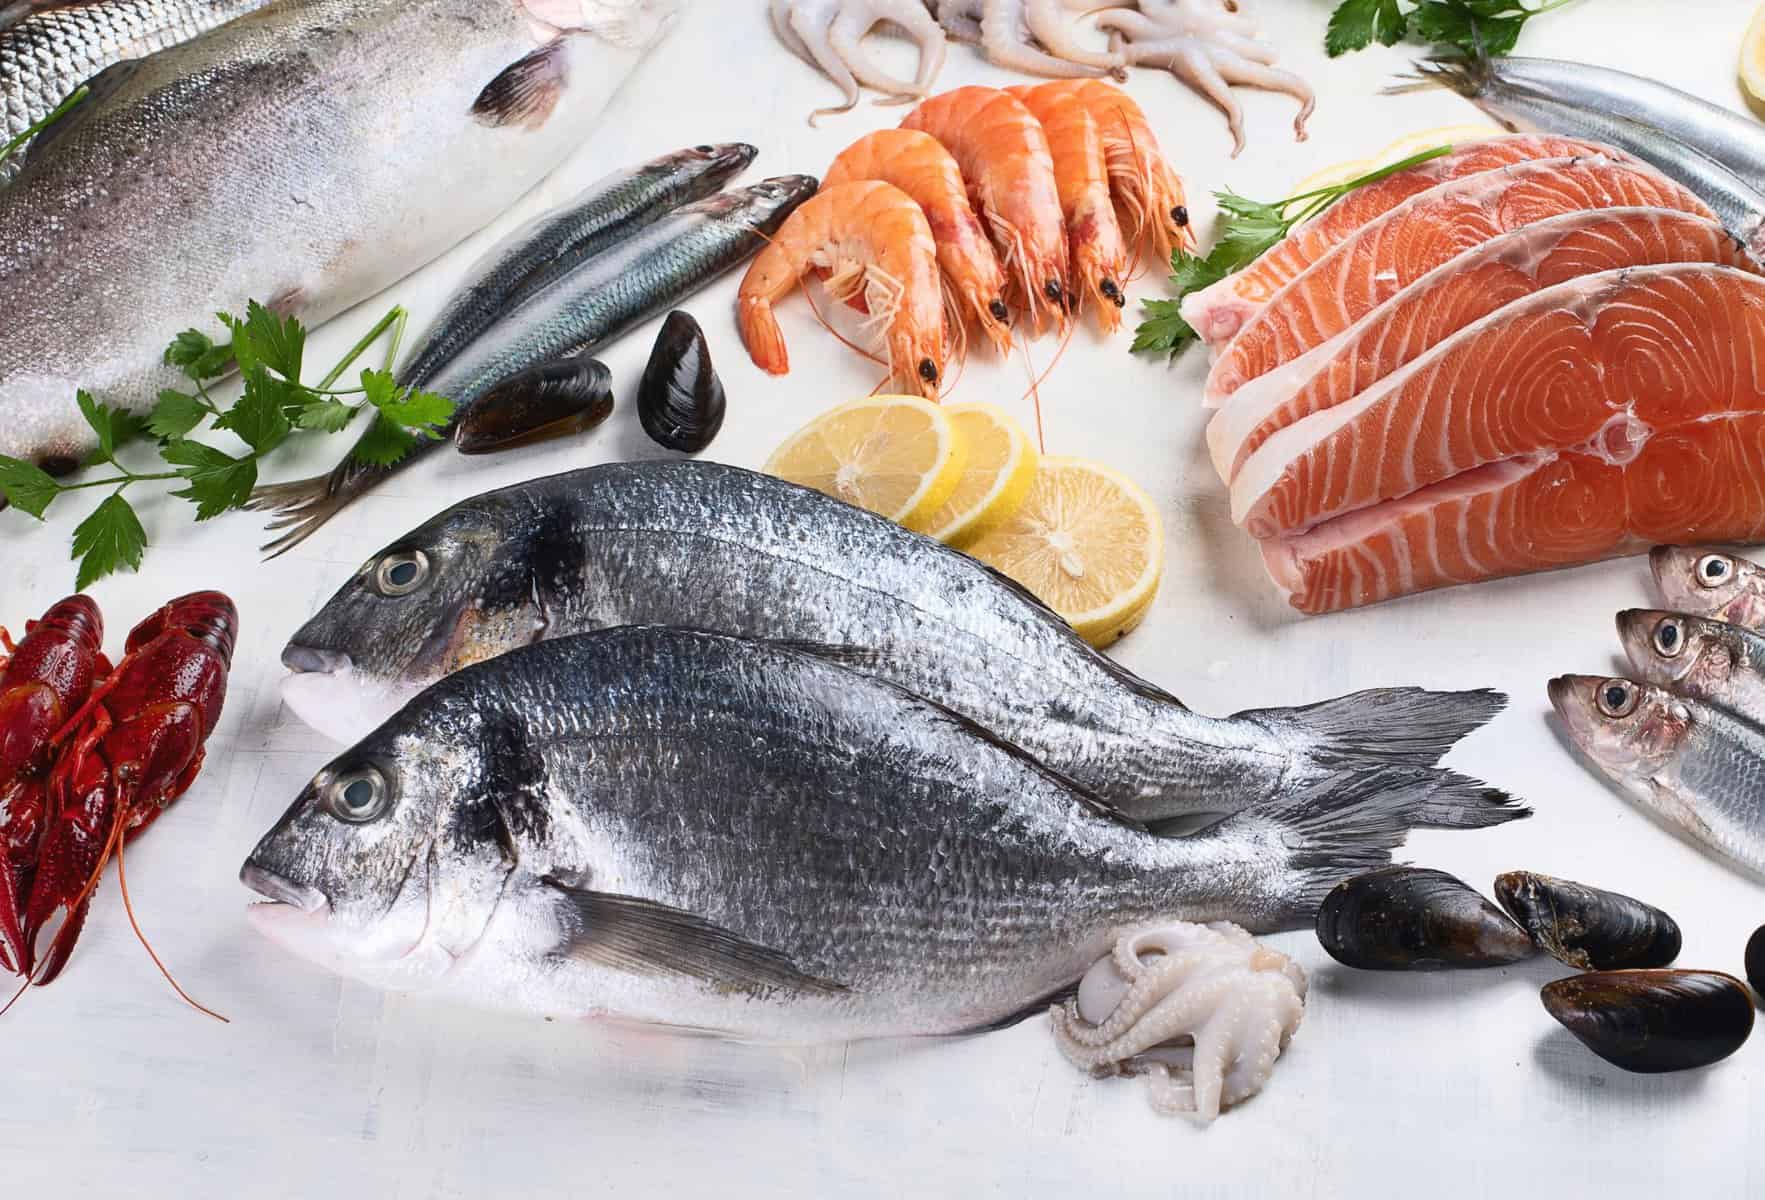 17 Fish You Should Never Eat PlusSafer Seafood Options - Dr. Axe